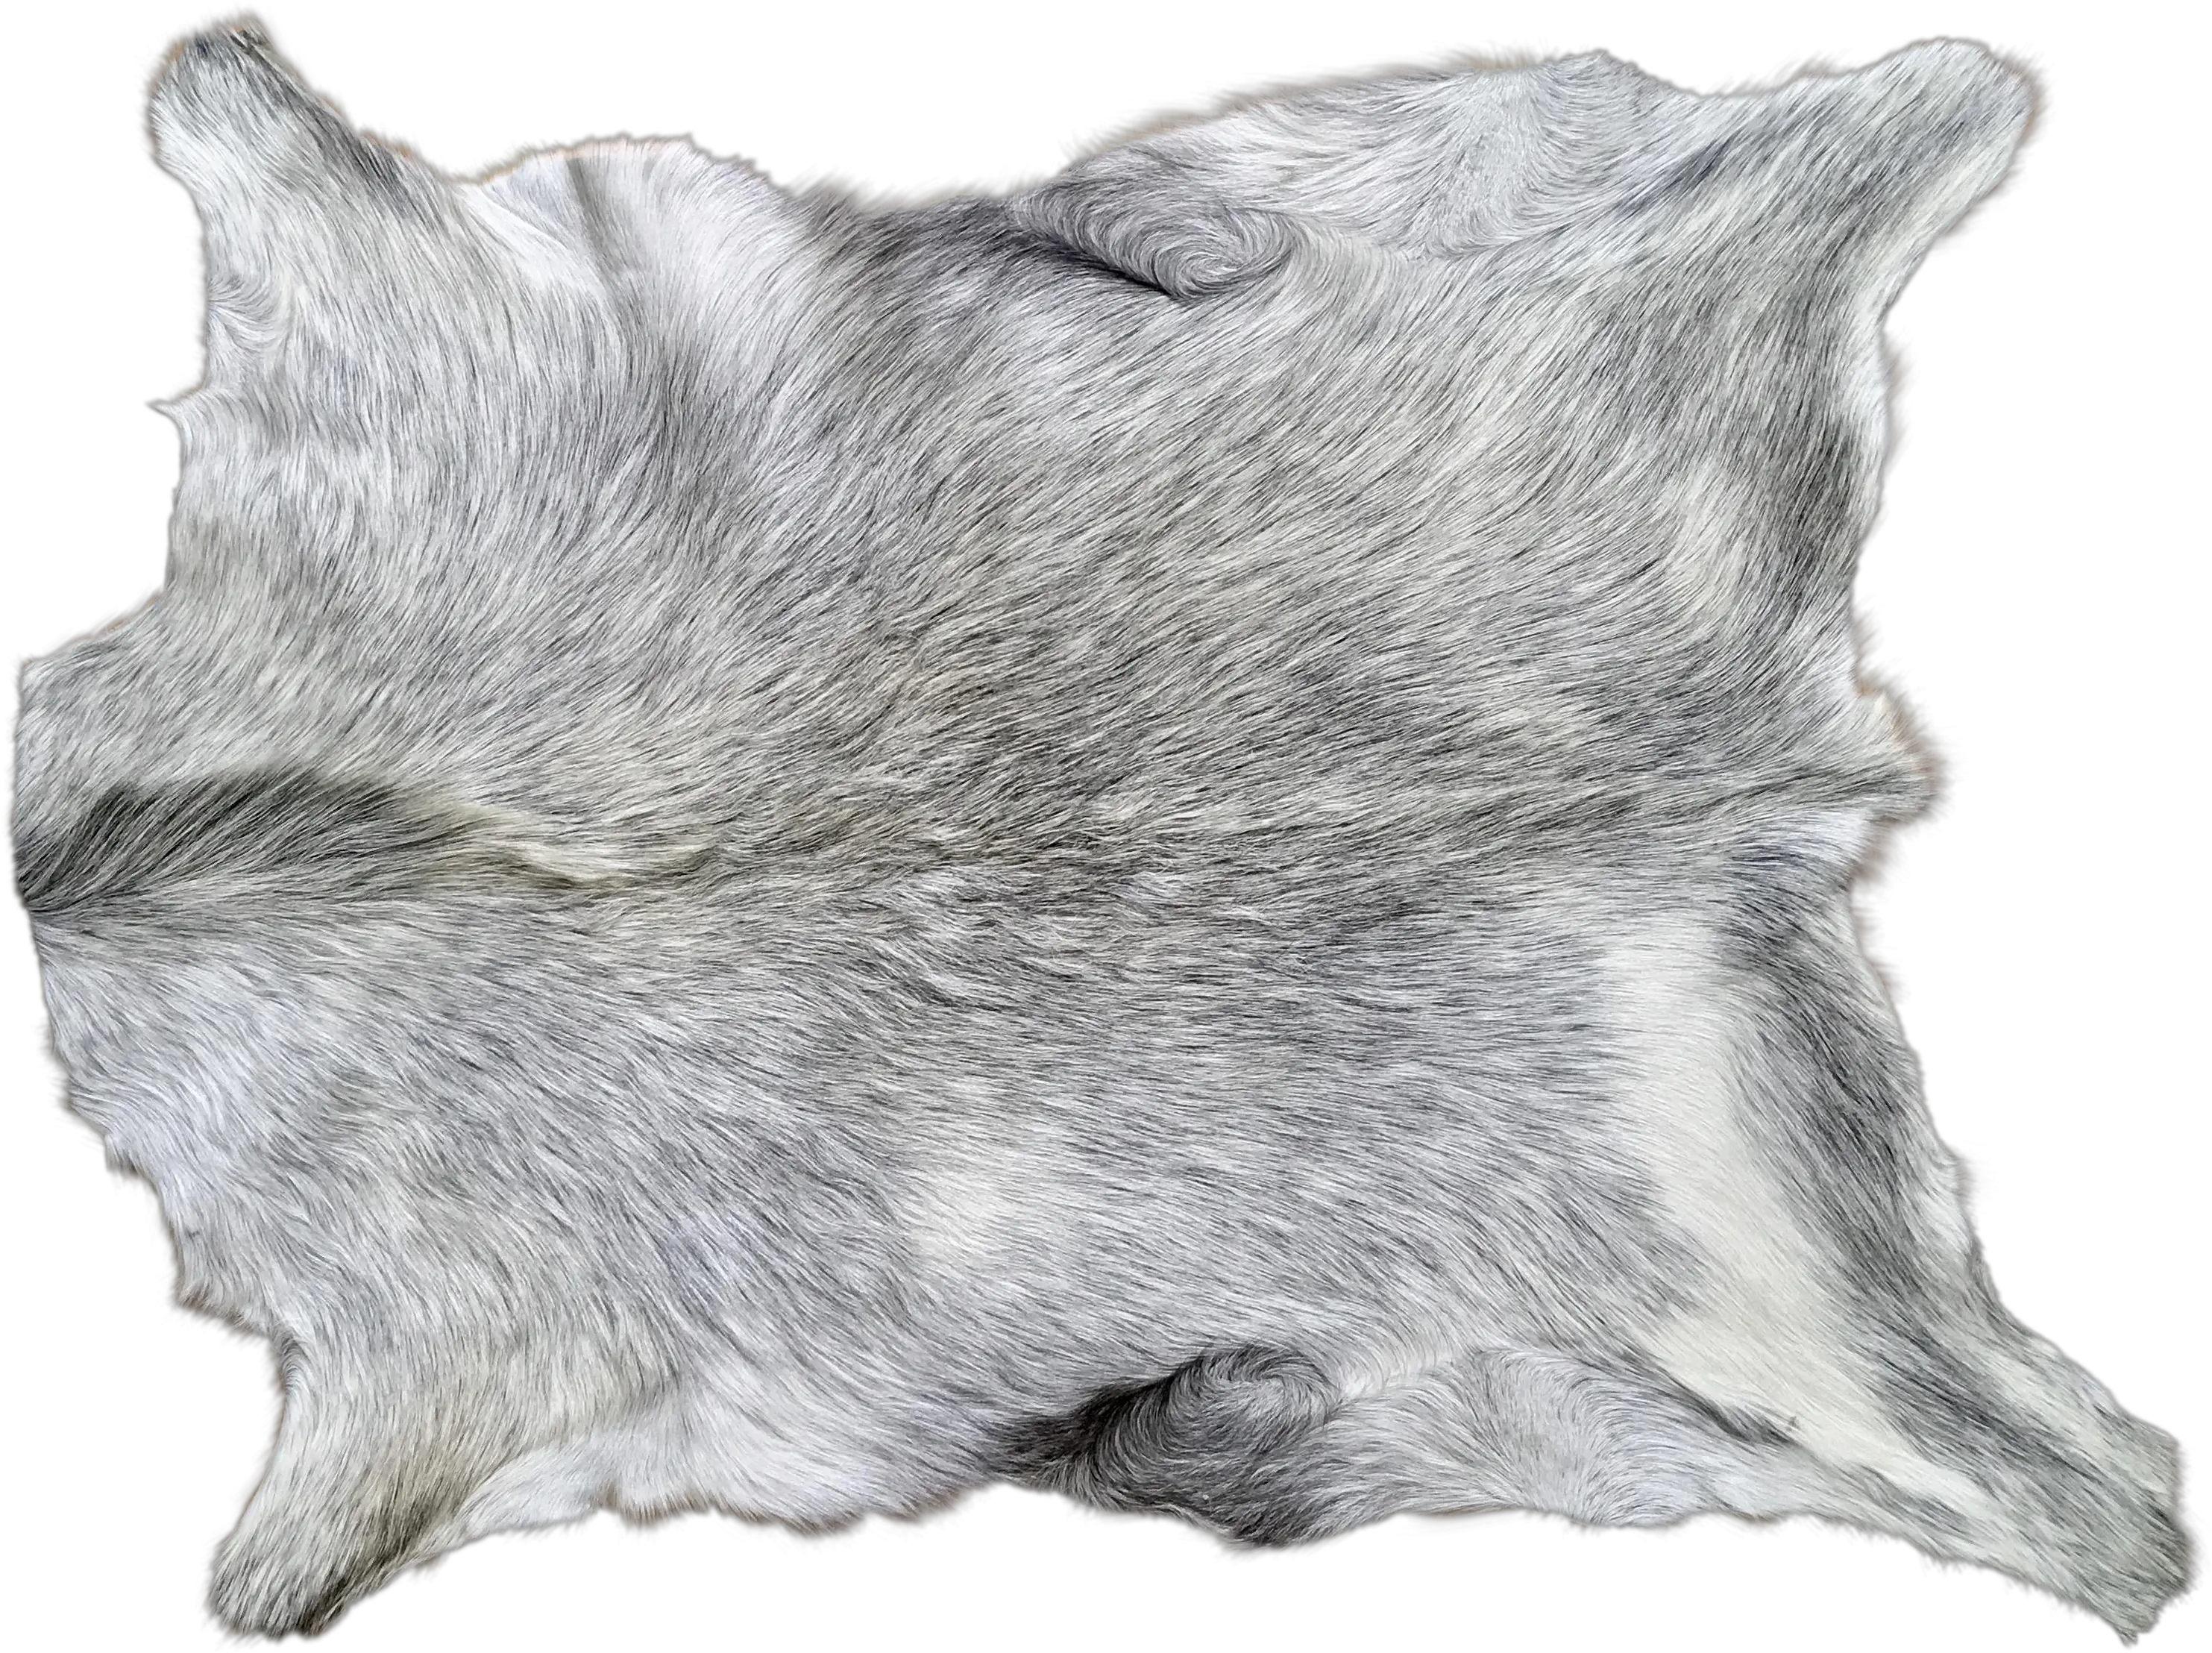 Goat Skin Rugs Carpet Full Size Png Download Seekpng Clipart Of Goat Skin Black And White Carpet Png